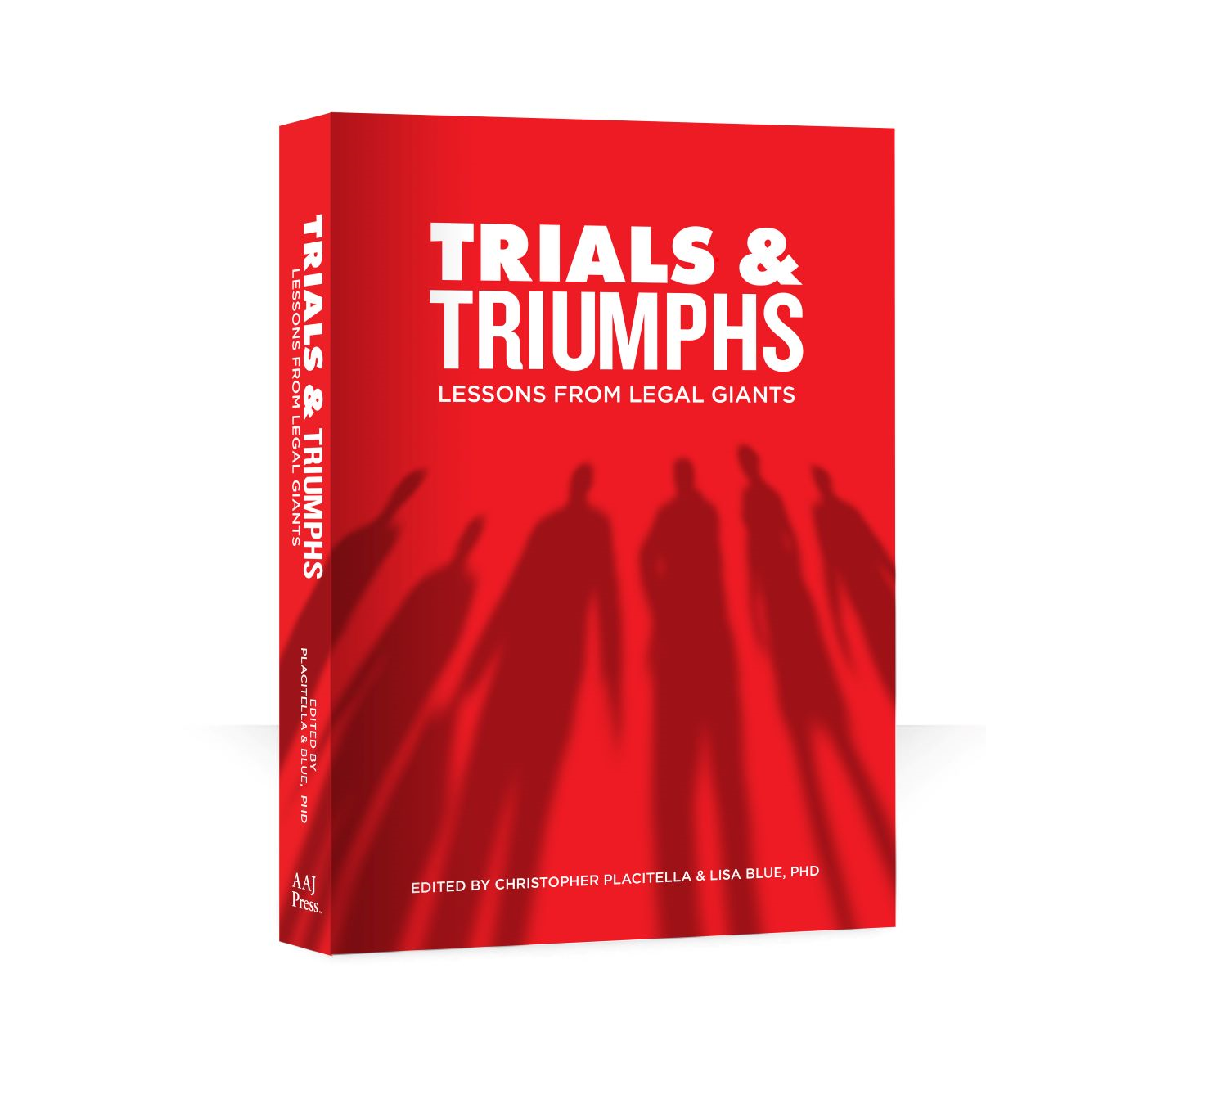 "Trials & Triumphs: Lessons from Legal Giants" on a red background with shadows of six people